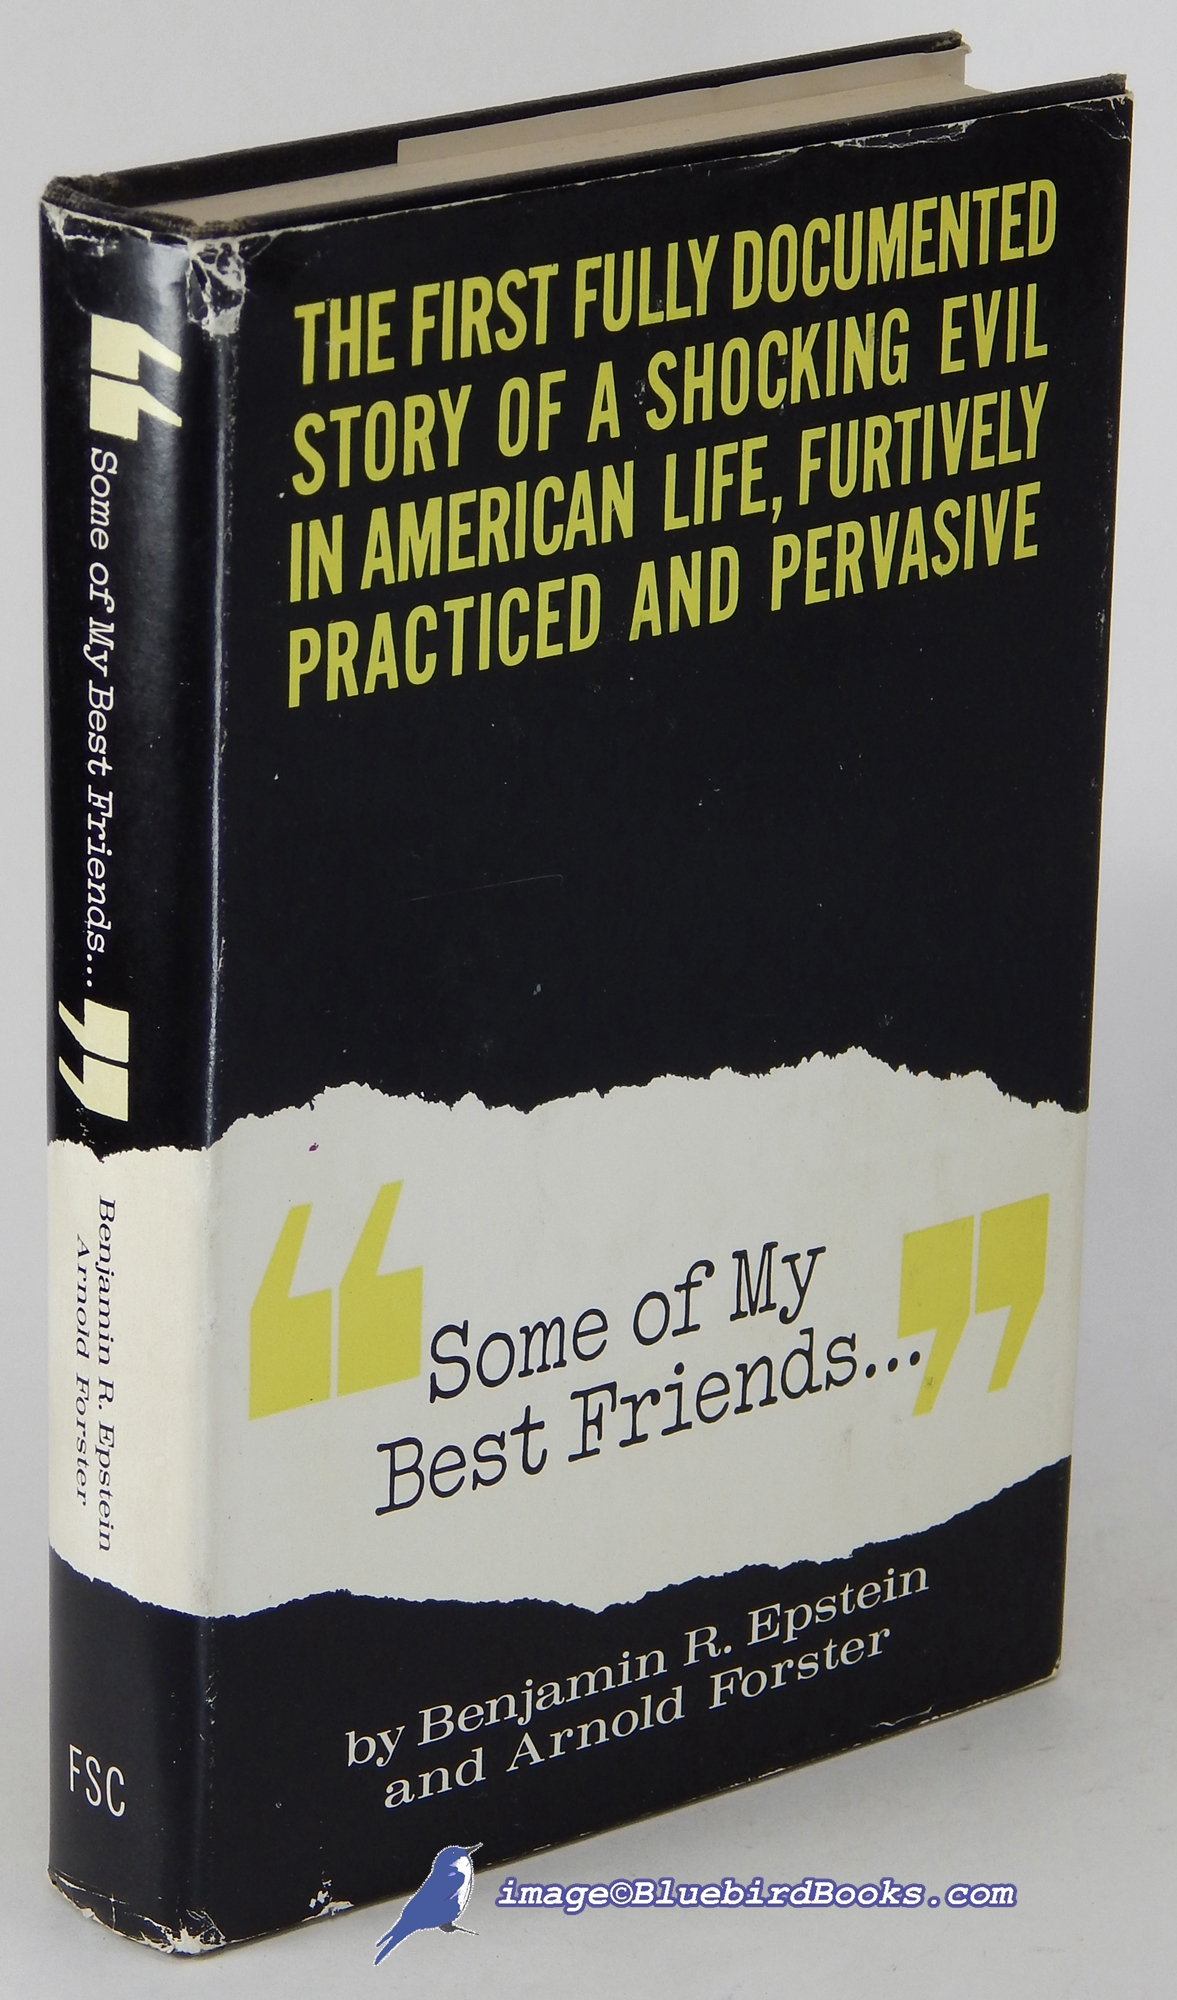 Image for . . "Some of My Best Friends . . ." : The First Fully Documented Story of a Shocking Evil in American Life, Furtively Practiced and Pervasive